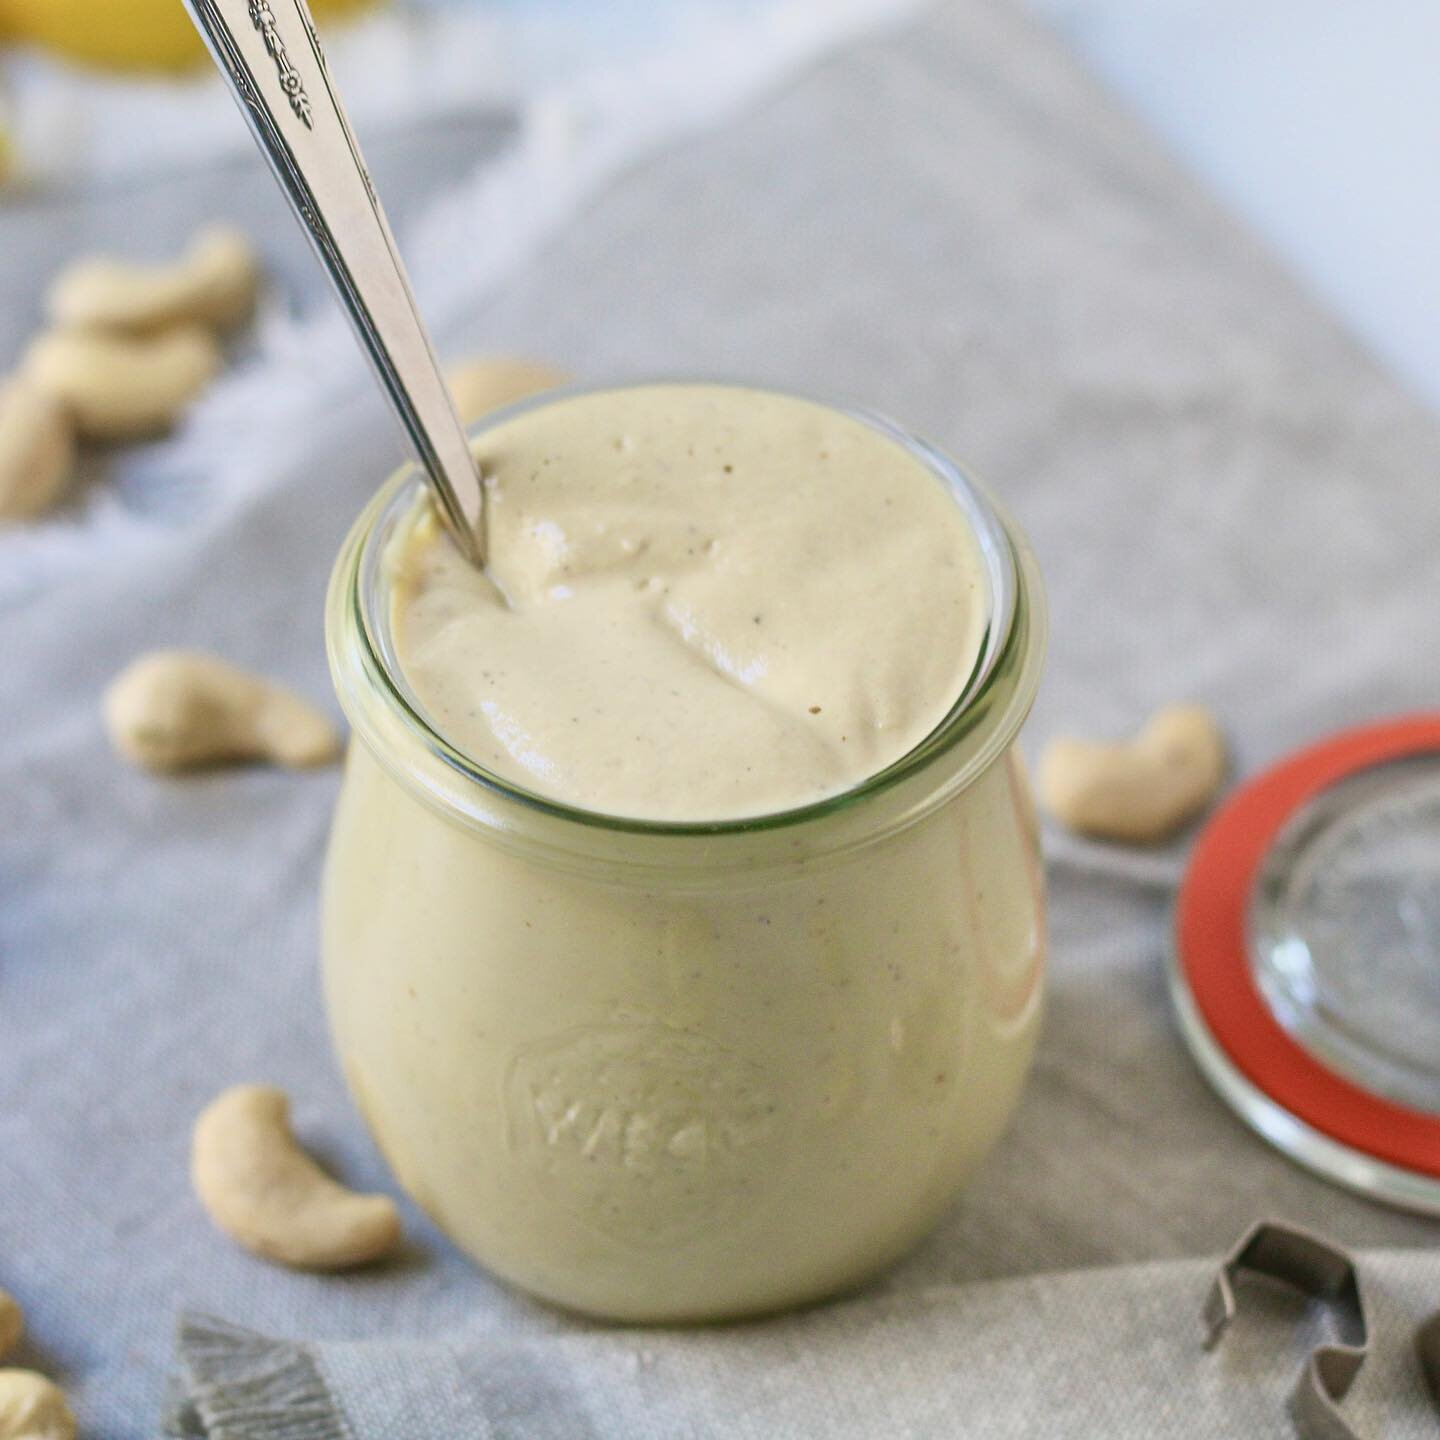 CREAMY CASHEW ALFREDO SAUCE

This recipe is the perfect go-to when your life has been as hectic as mine has been this month 😅!

I&rsquo;ll be back to sharing new recipes soon but until then please enjoy some old favorites! 

CASHEW ALFREDO: 

- 1 cu